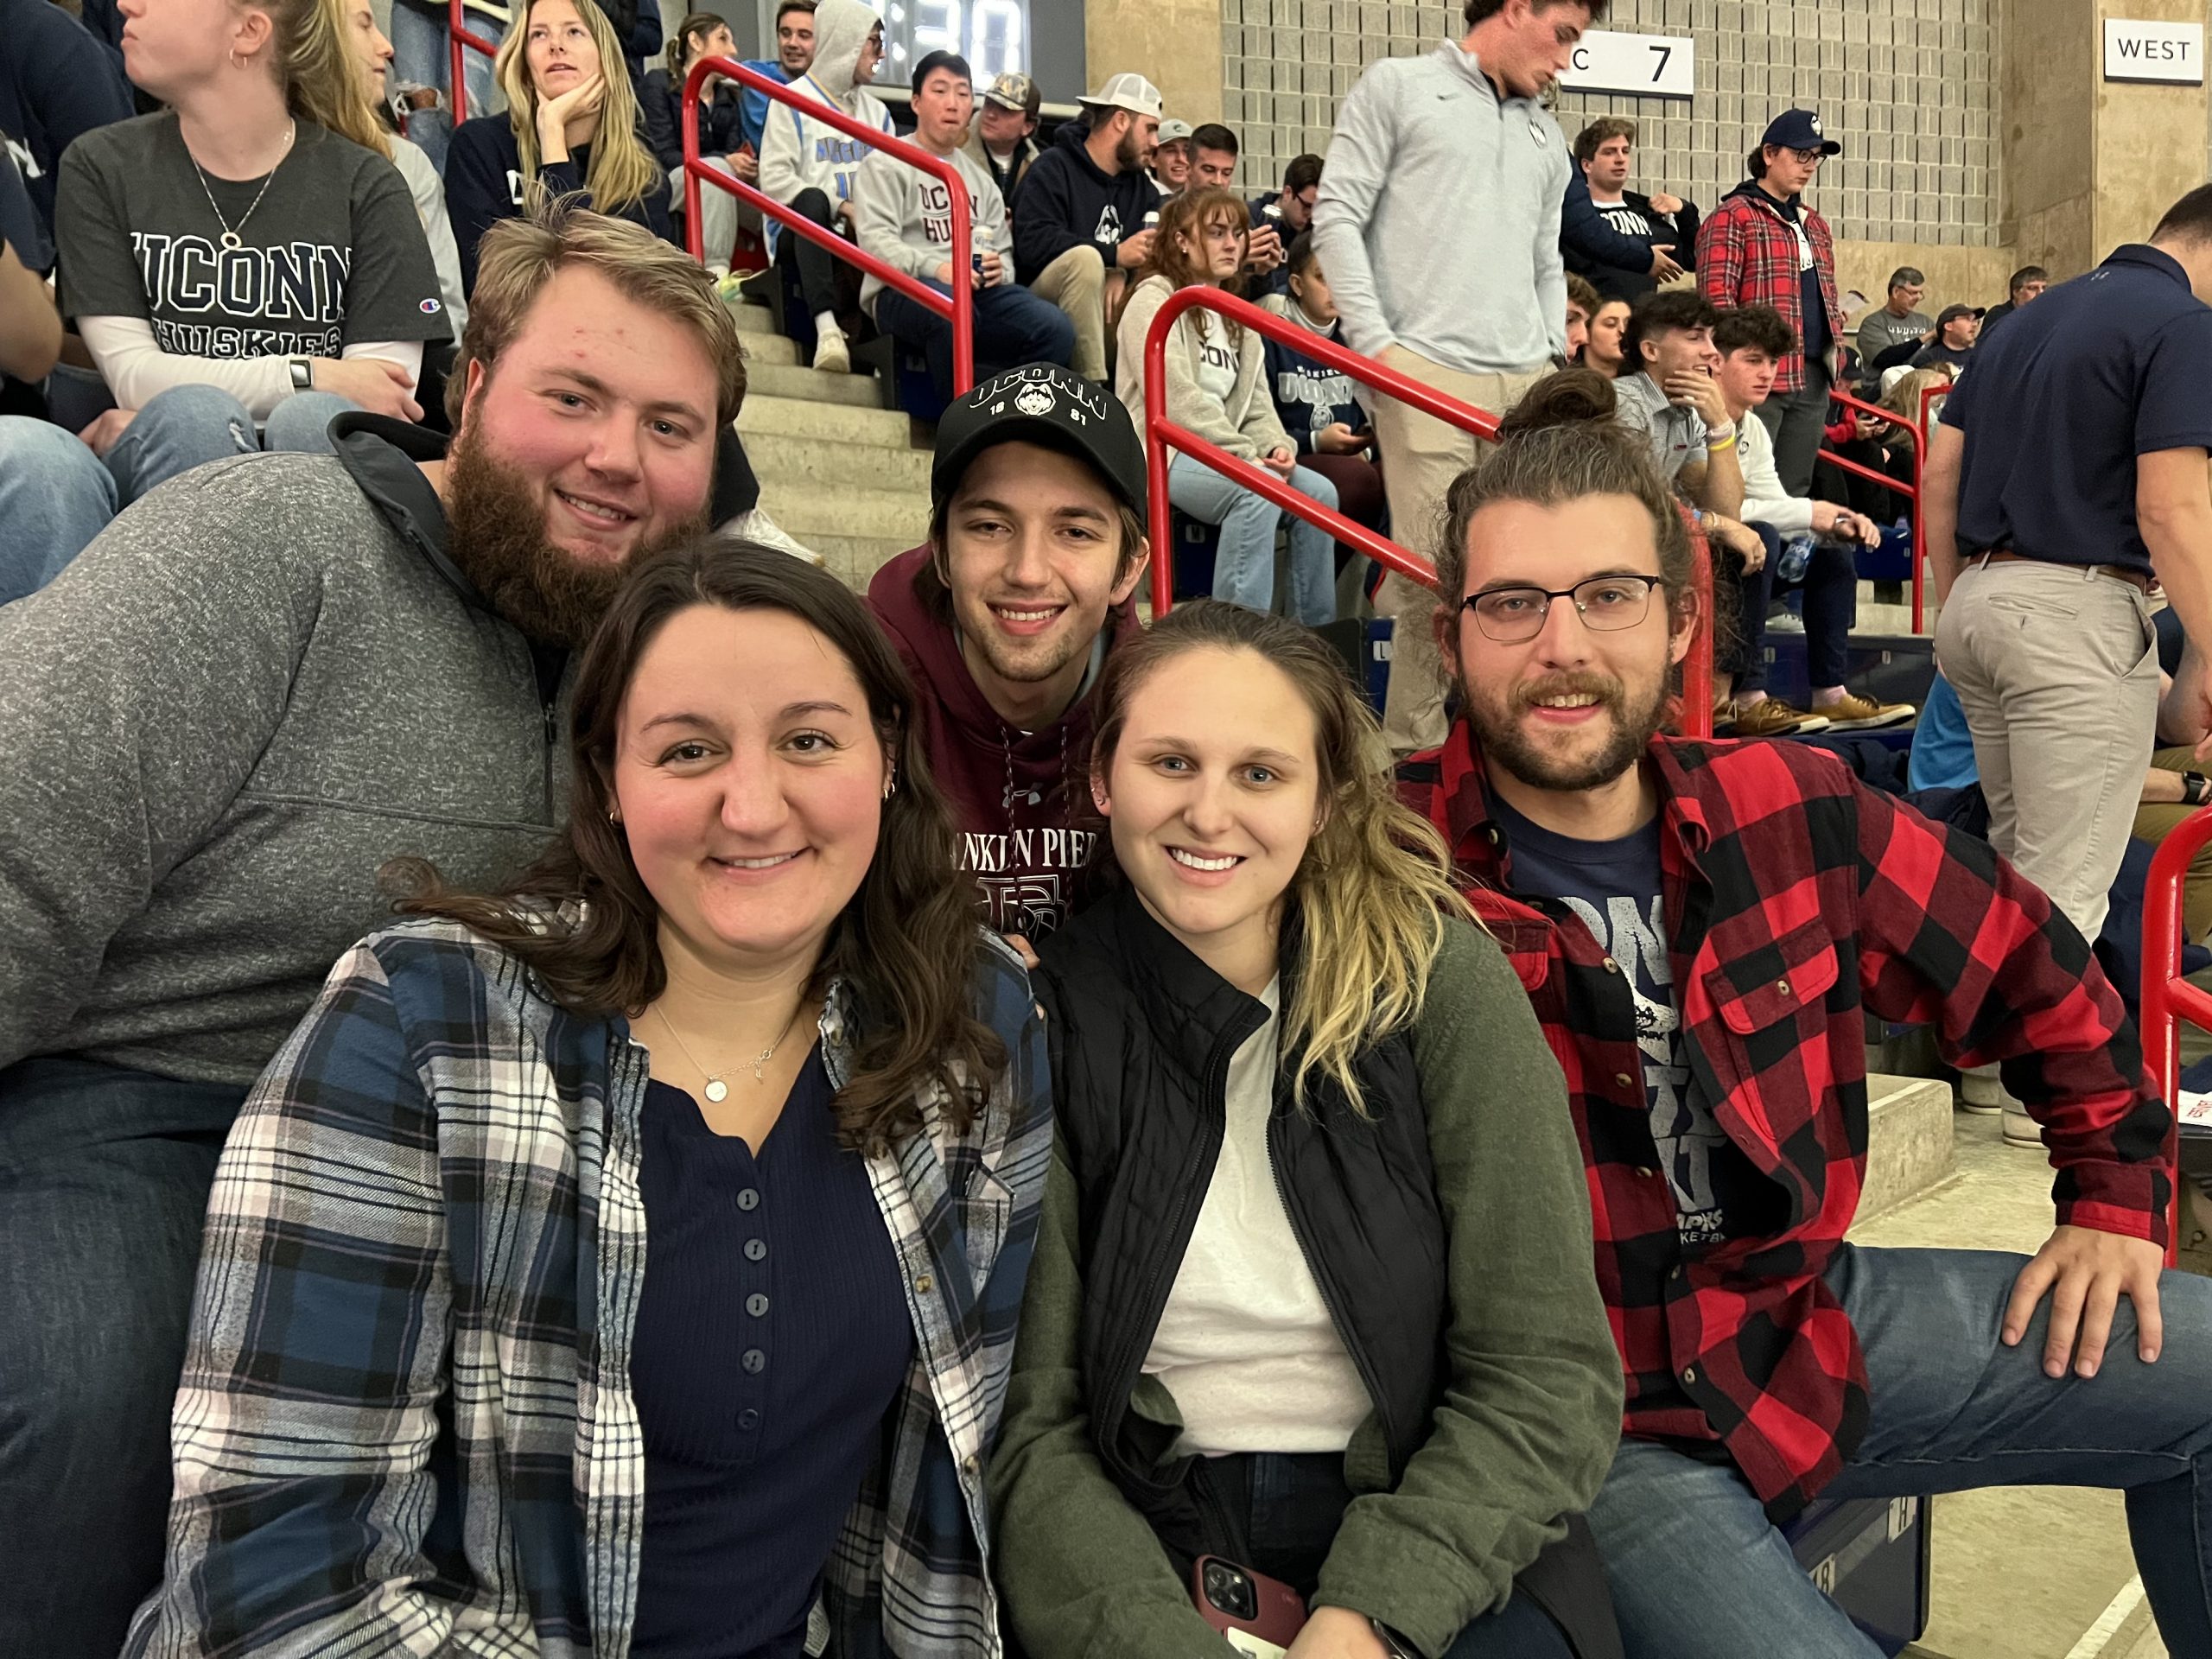 Russ and Brenden with graduate student friends at a UConn Huskies basketball game!